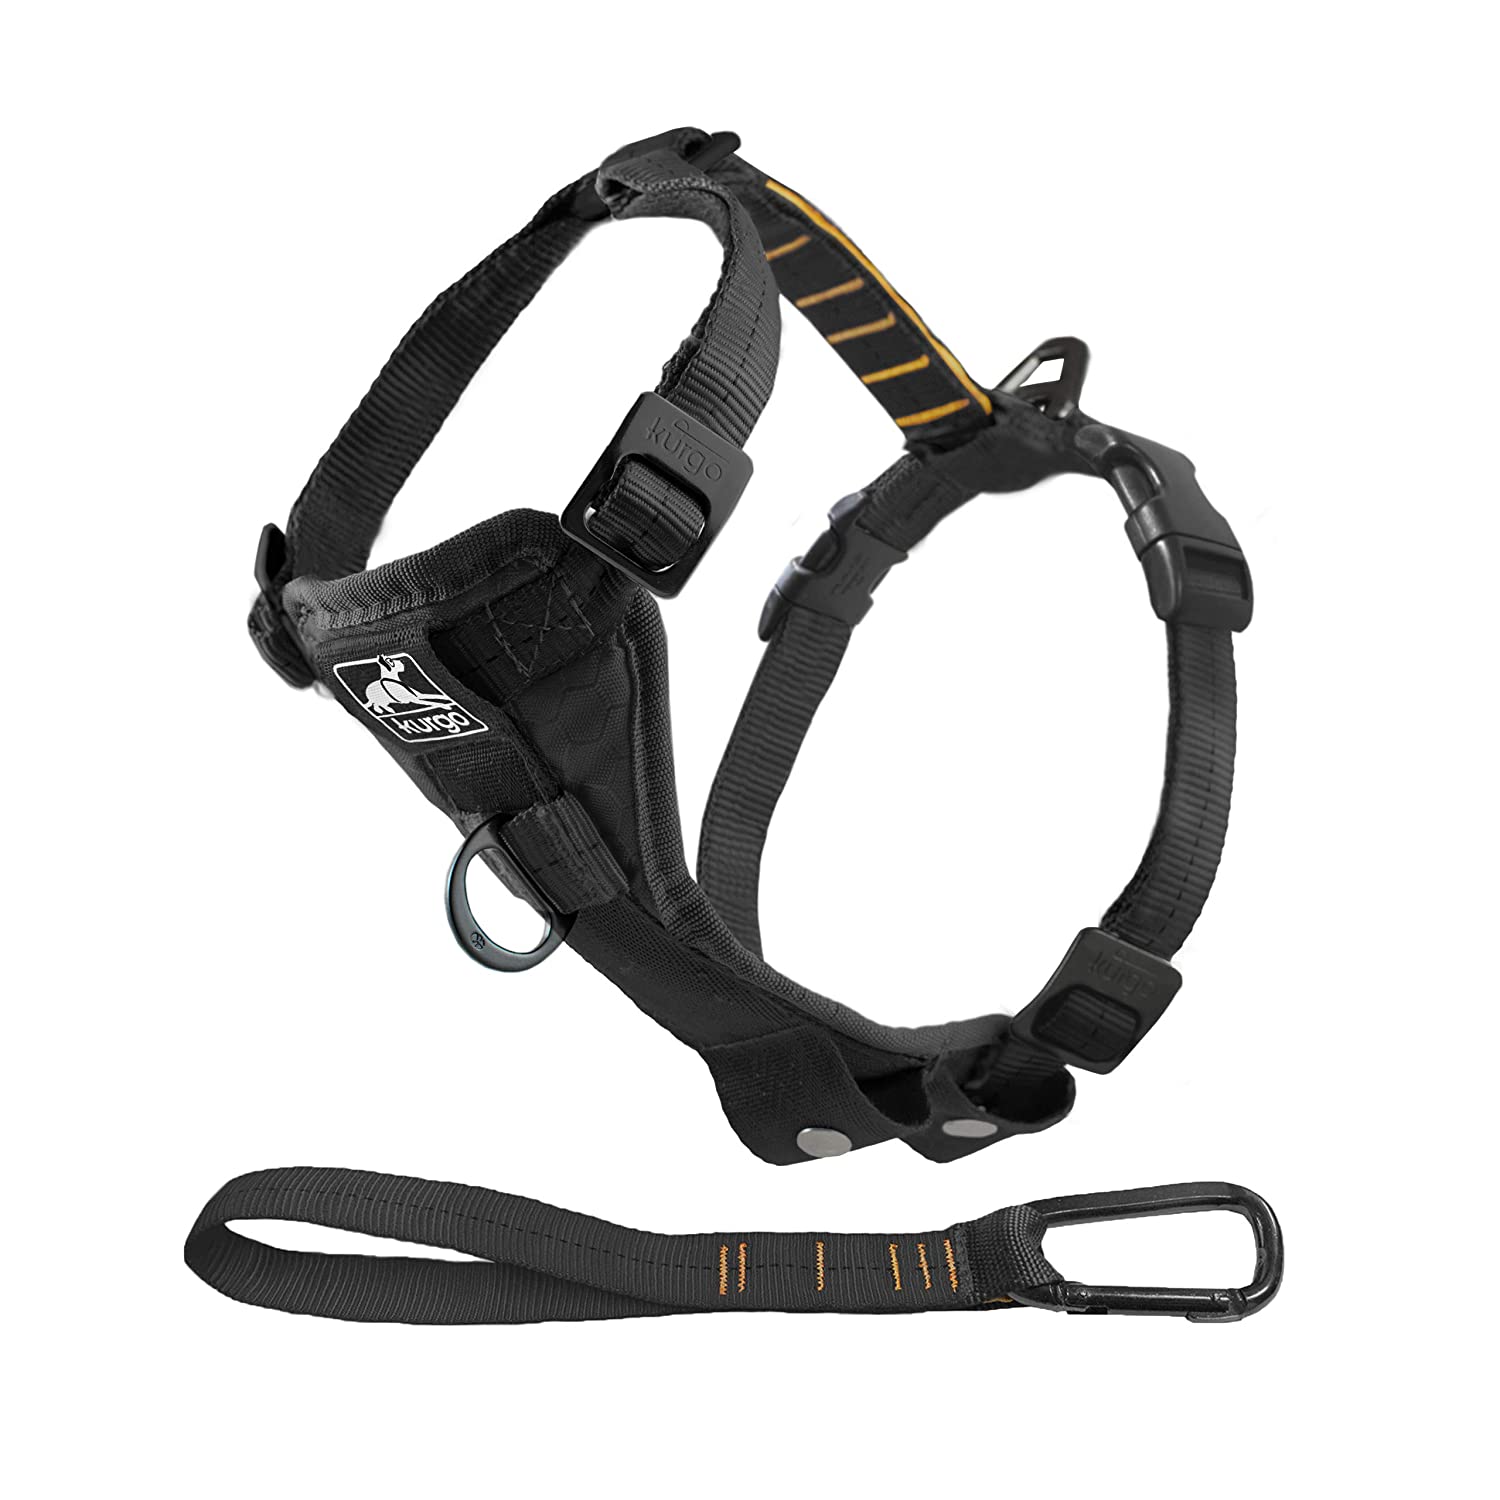 Kurgo Car Safety Harness for Dogs